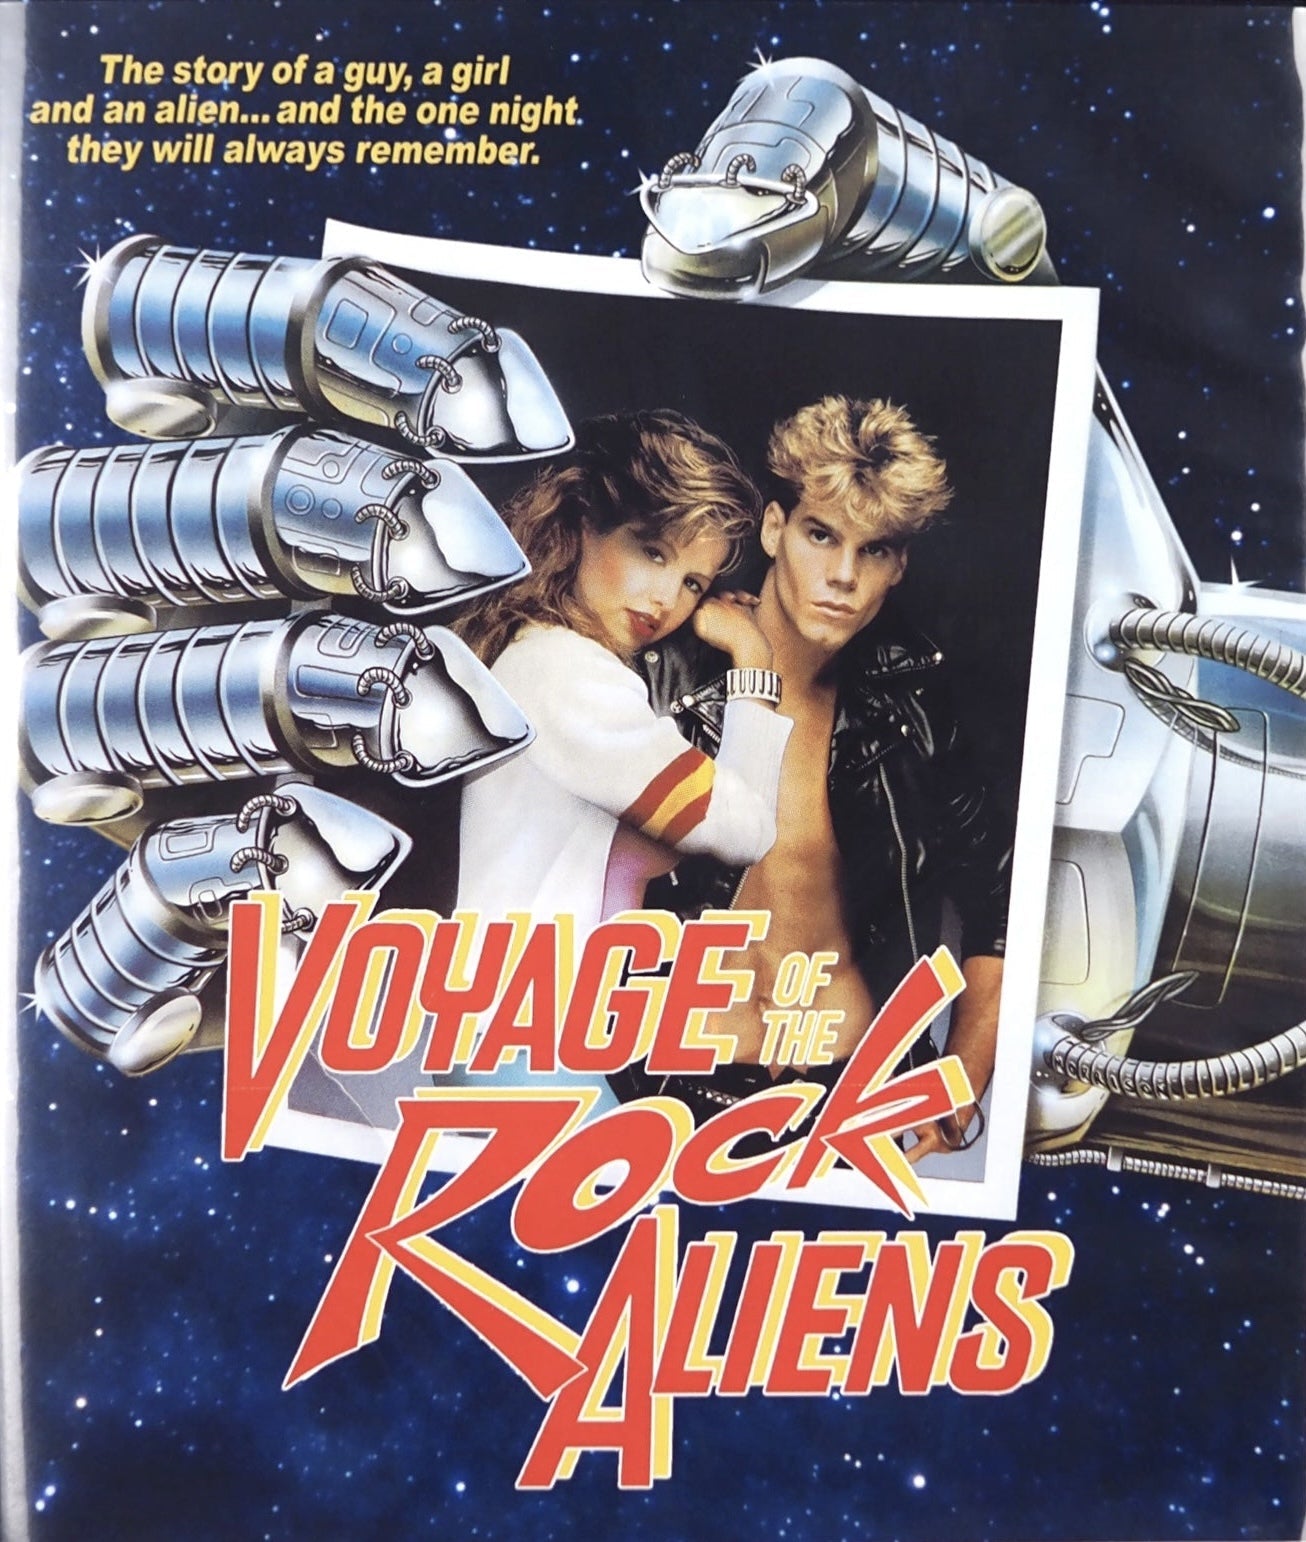 VOYAGE OF THE ROCK ALIENS (LIMITED EDITION) BLU-RAY